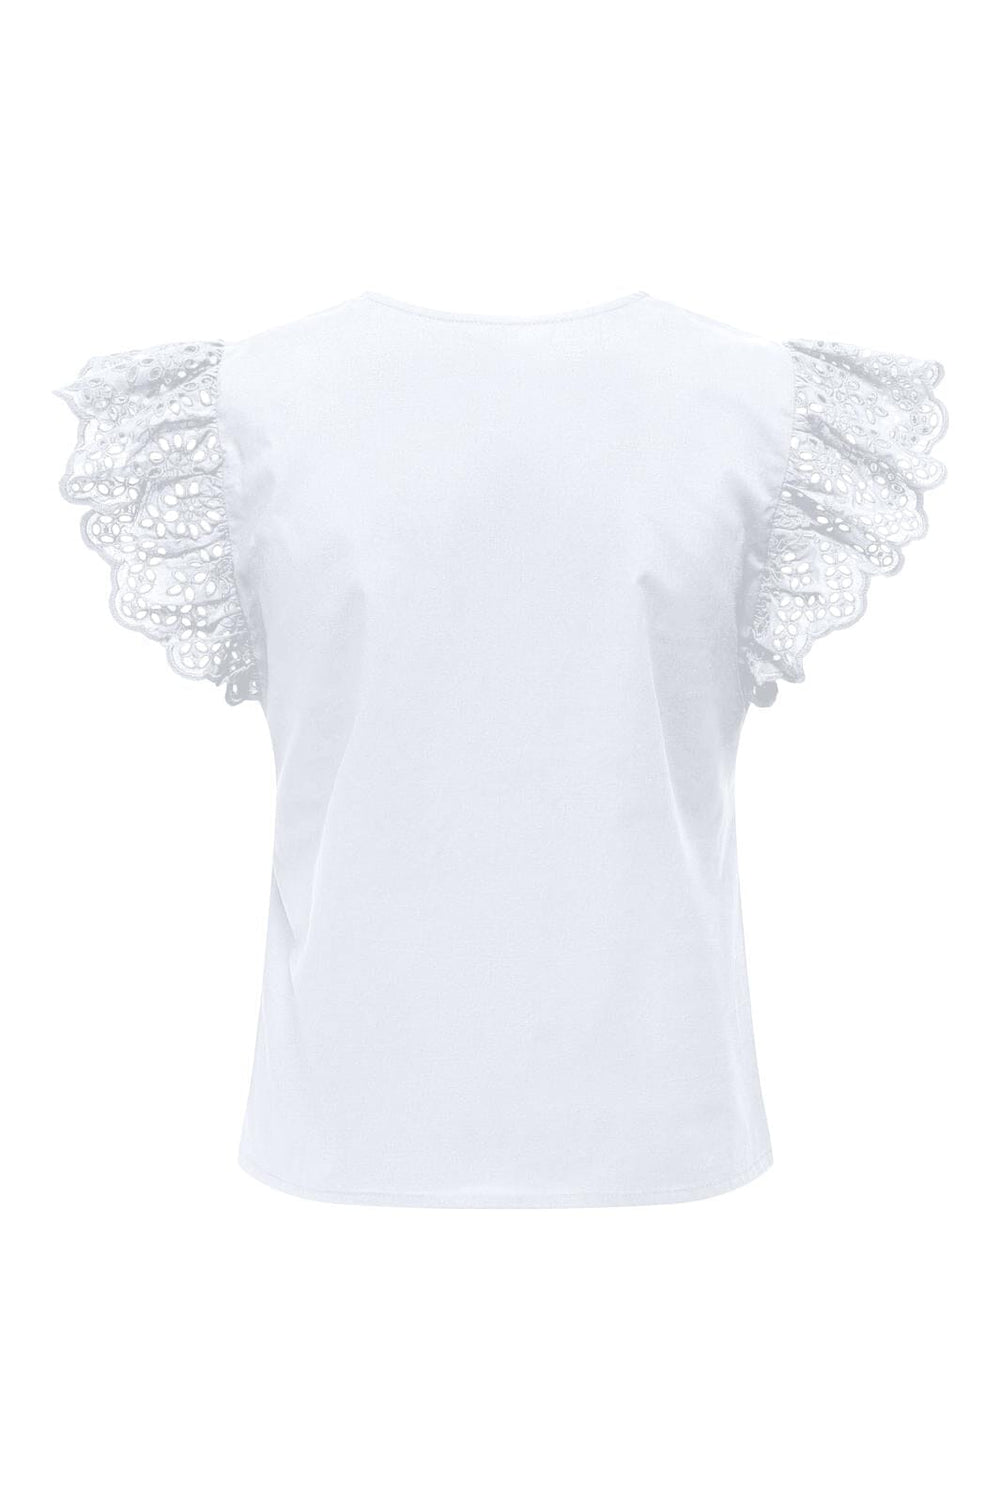 Only - Onllou Life Emb S/S Frill Top - 4428001 Bright White